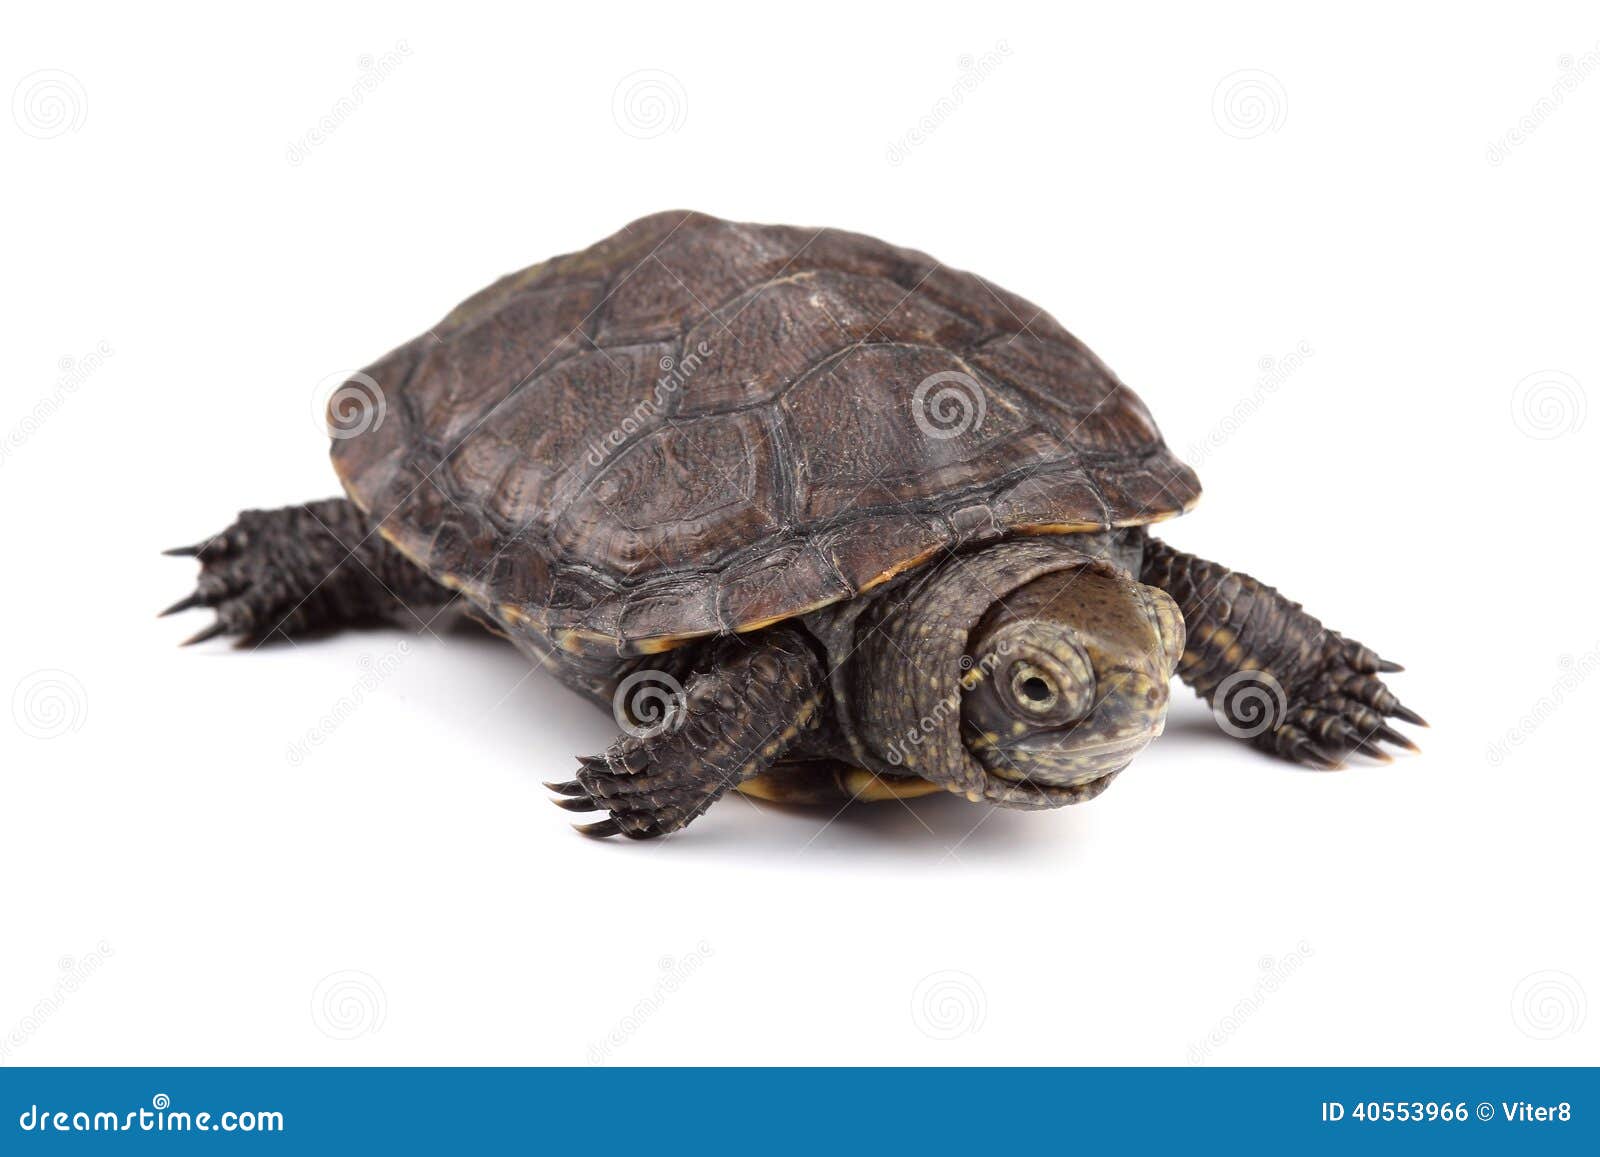 Young European Pond Turtle Isolated on White Stock Photo - Image of ...